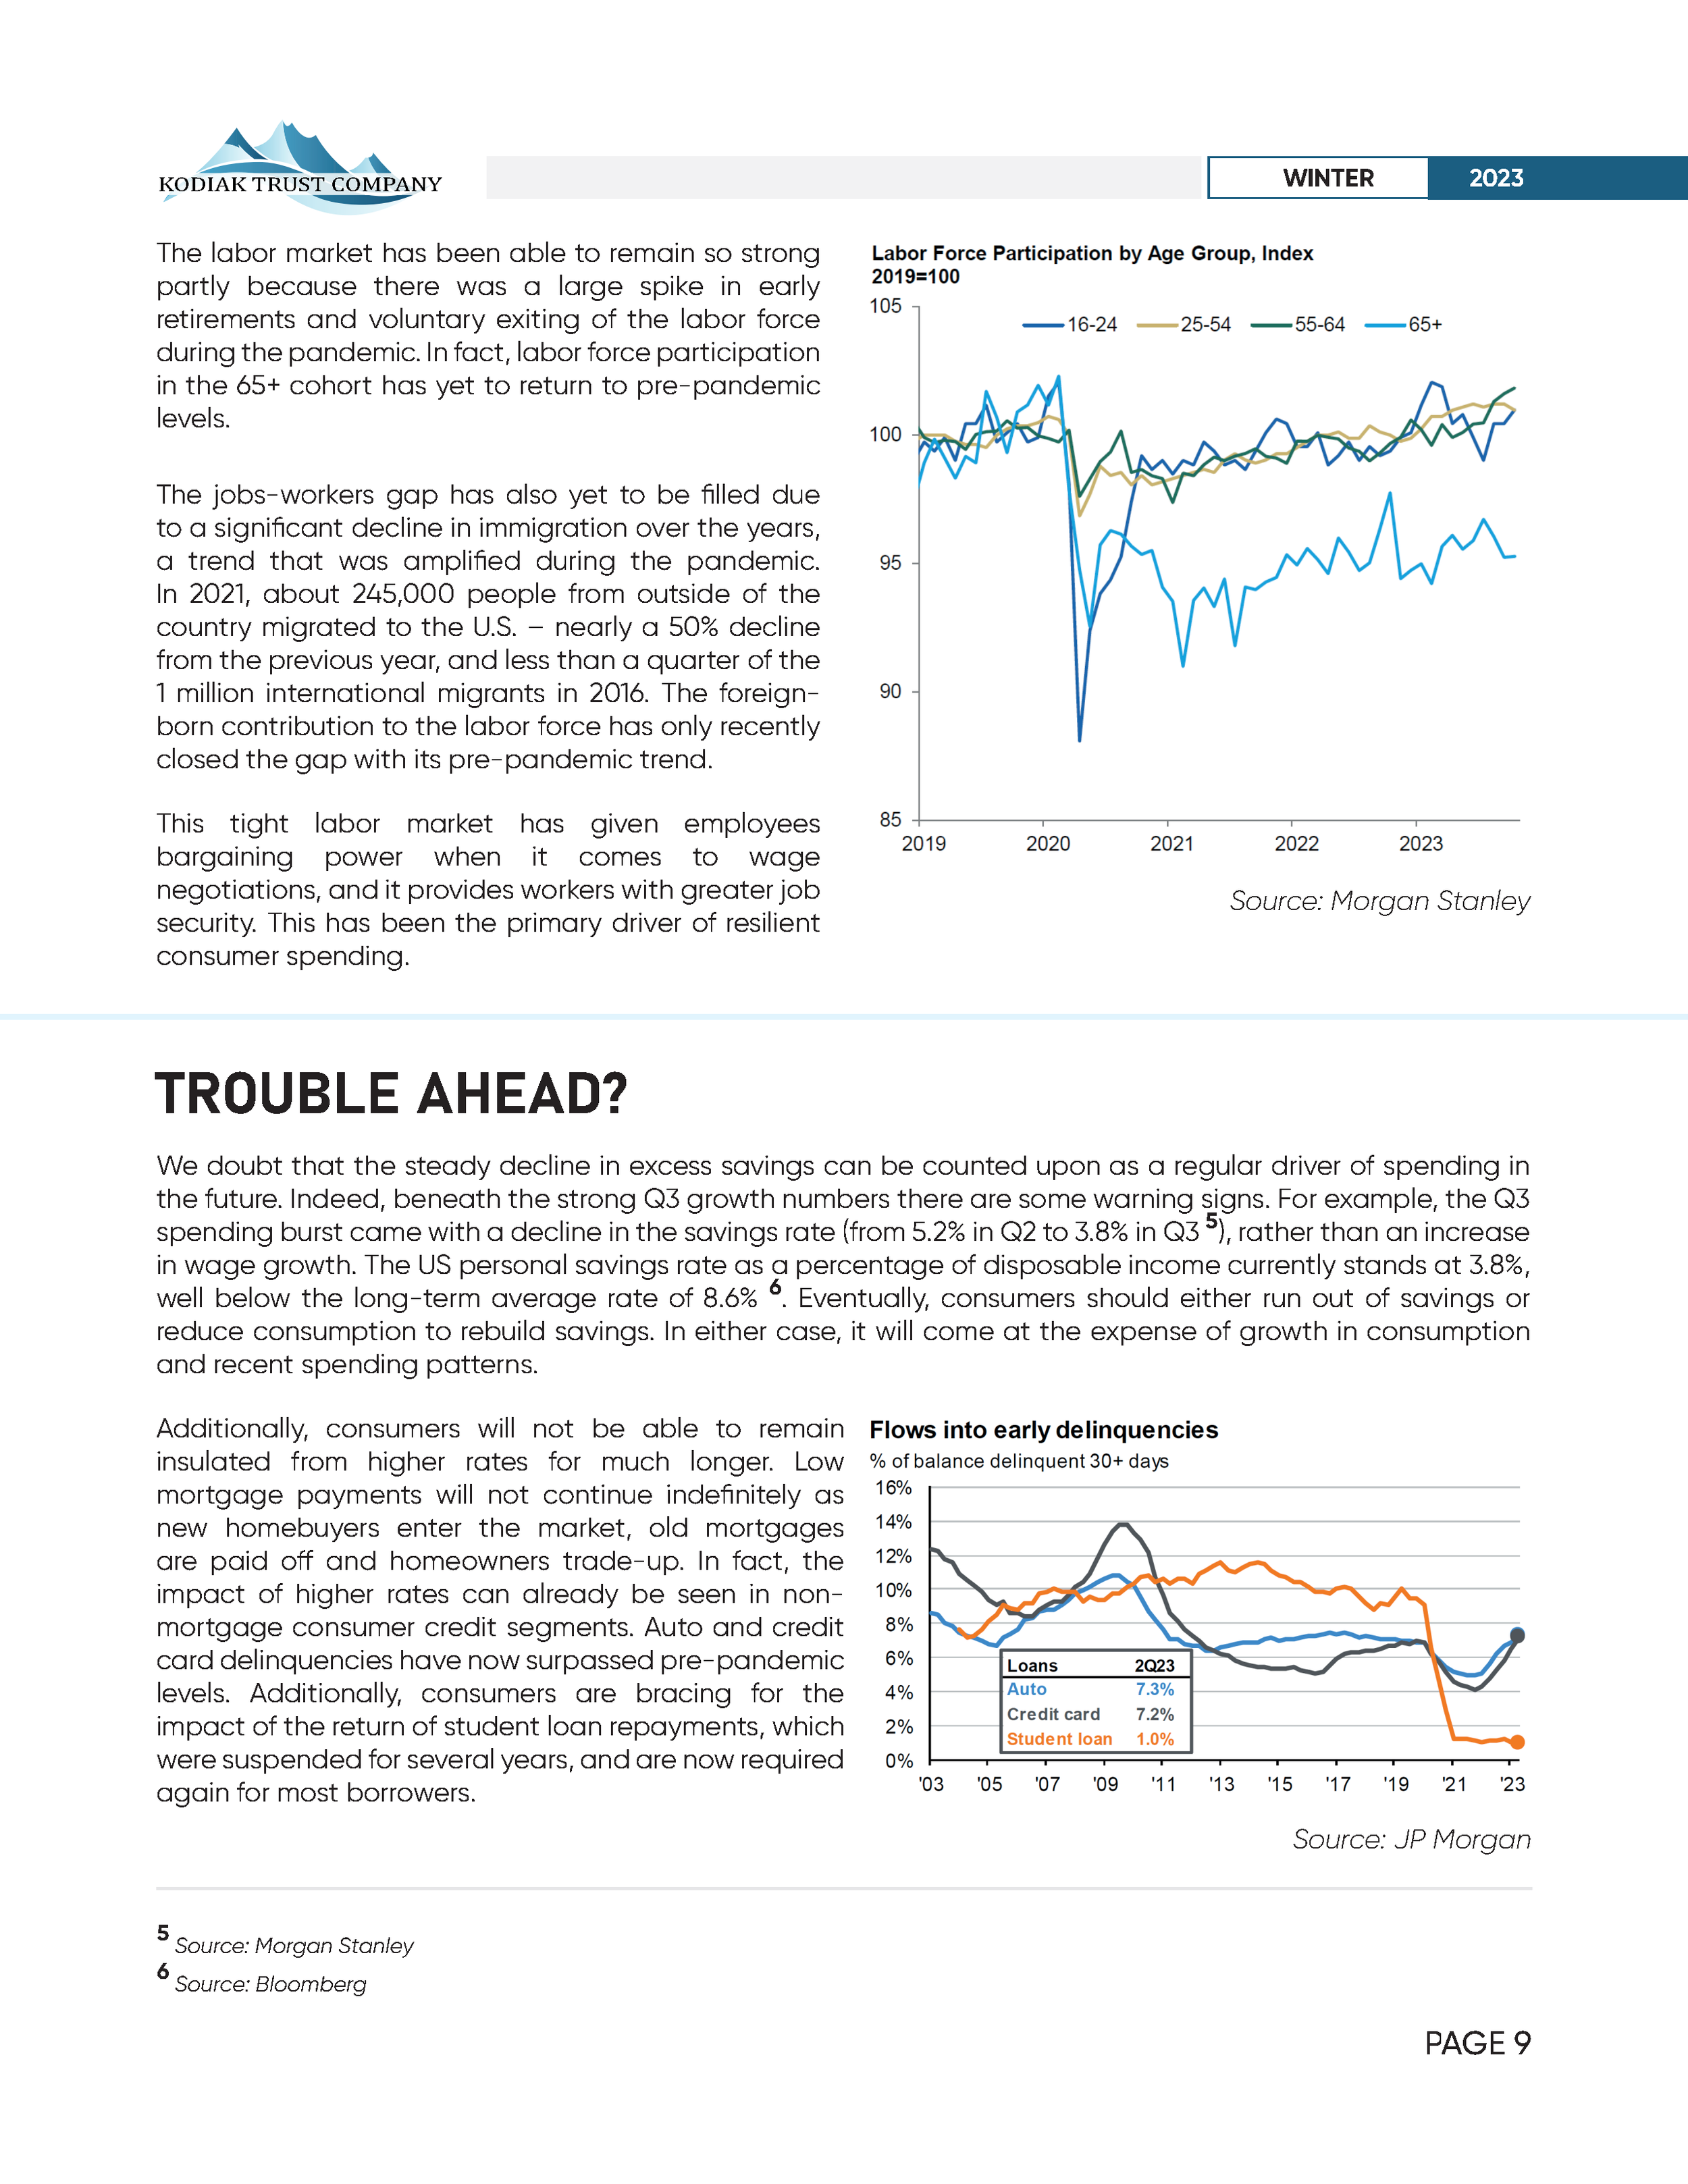 KTC QUARTERLY NEWSLETTER WINTER 2023_Page9.png